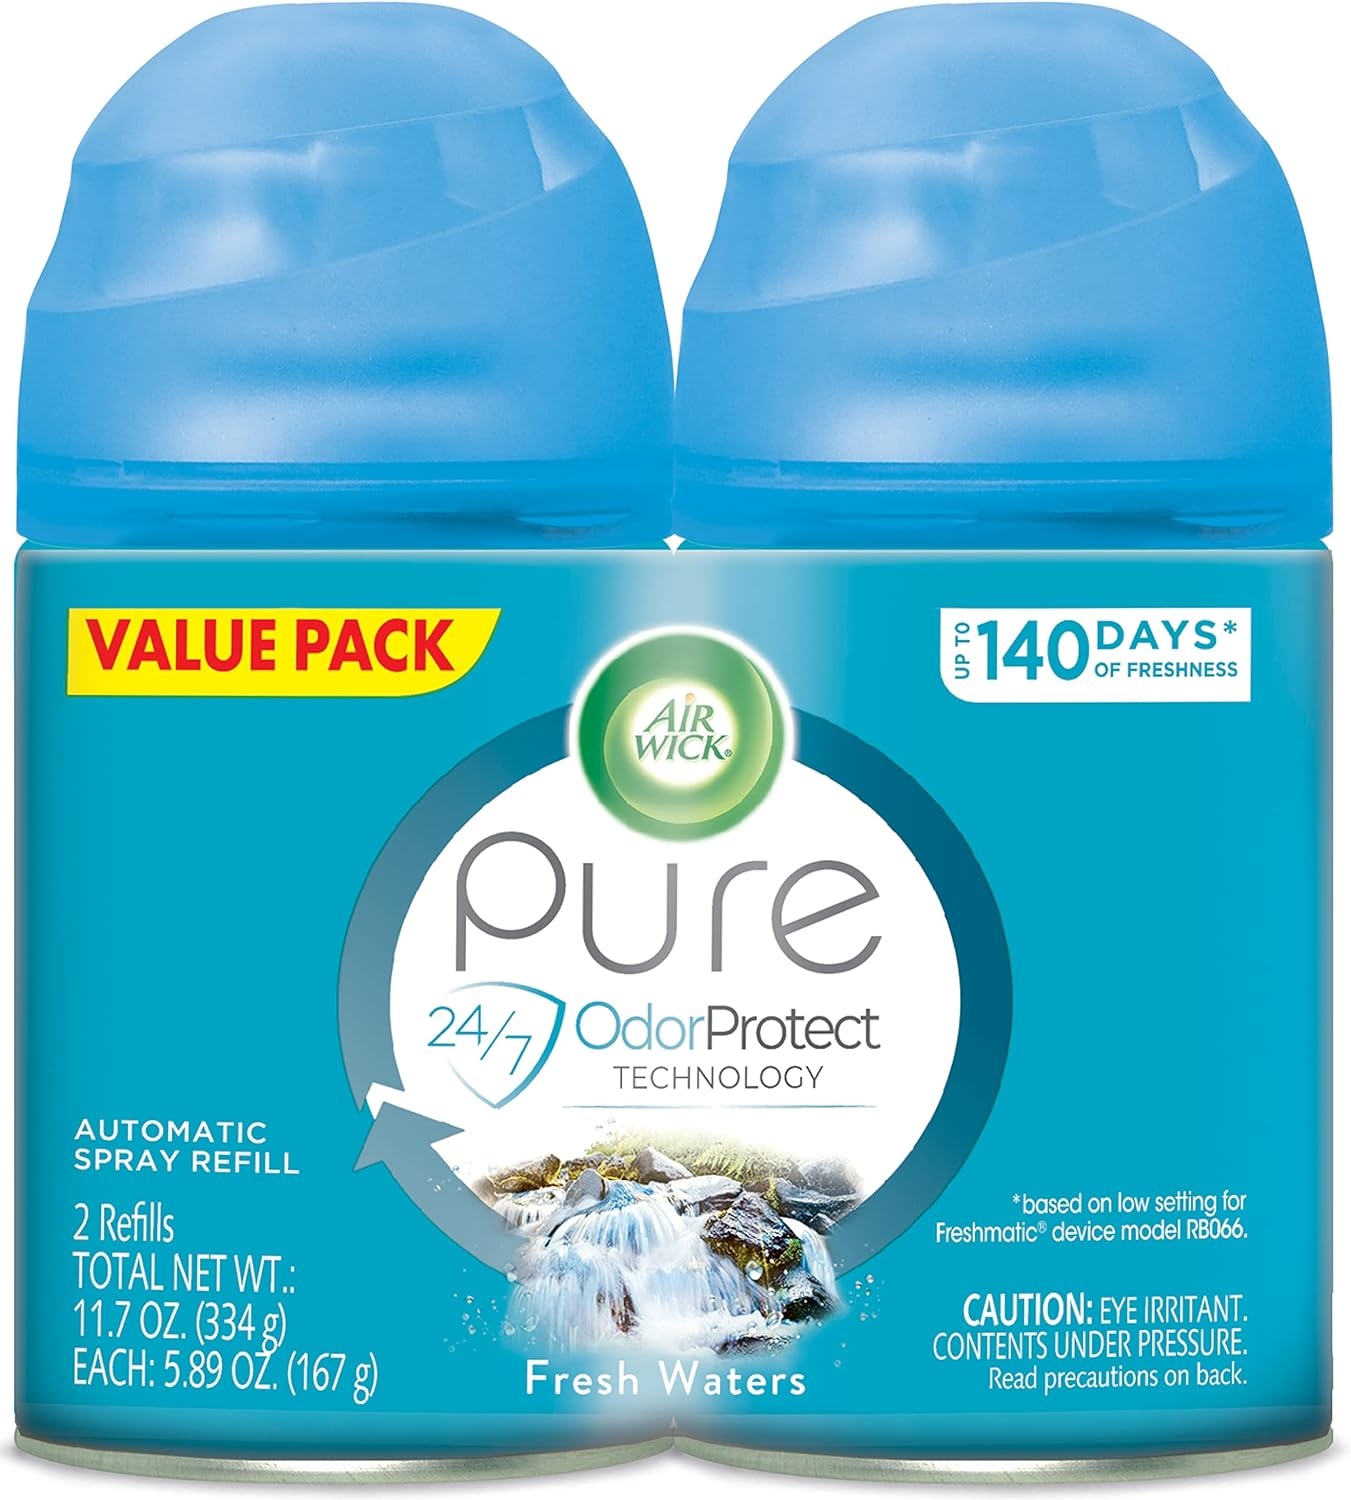 Air Wick Pure Freshmatic 2 Refills Automatic Spray, Fresh Waters, Air Freshener, Essential Oil, Odor Neutralization, Packaging May Vary, 5.89 Ounce